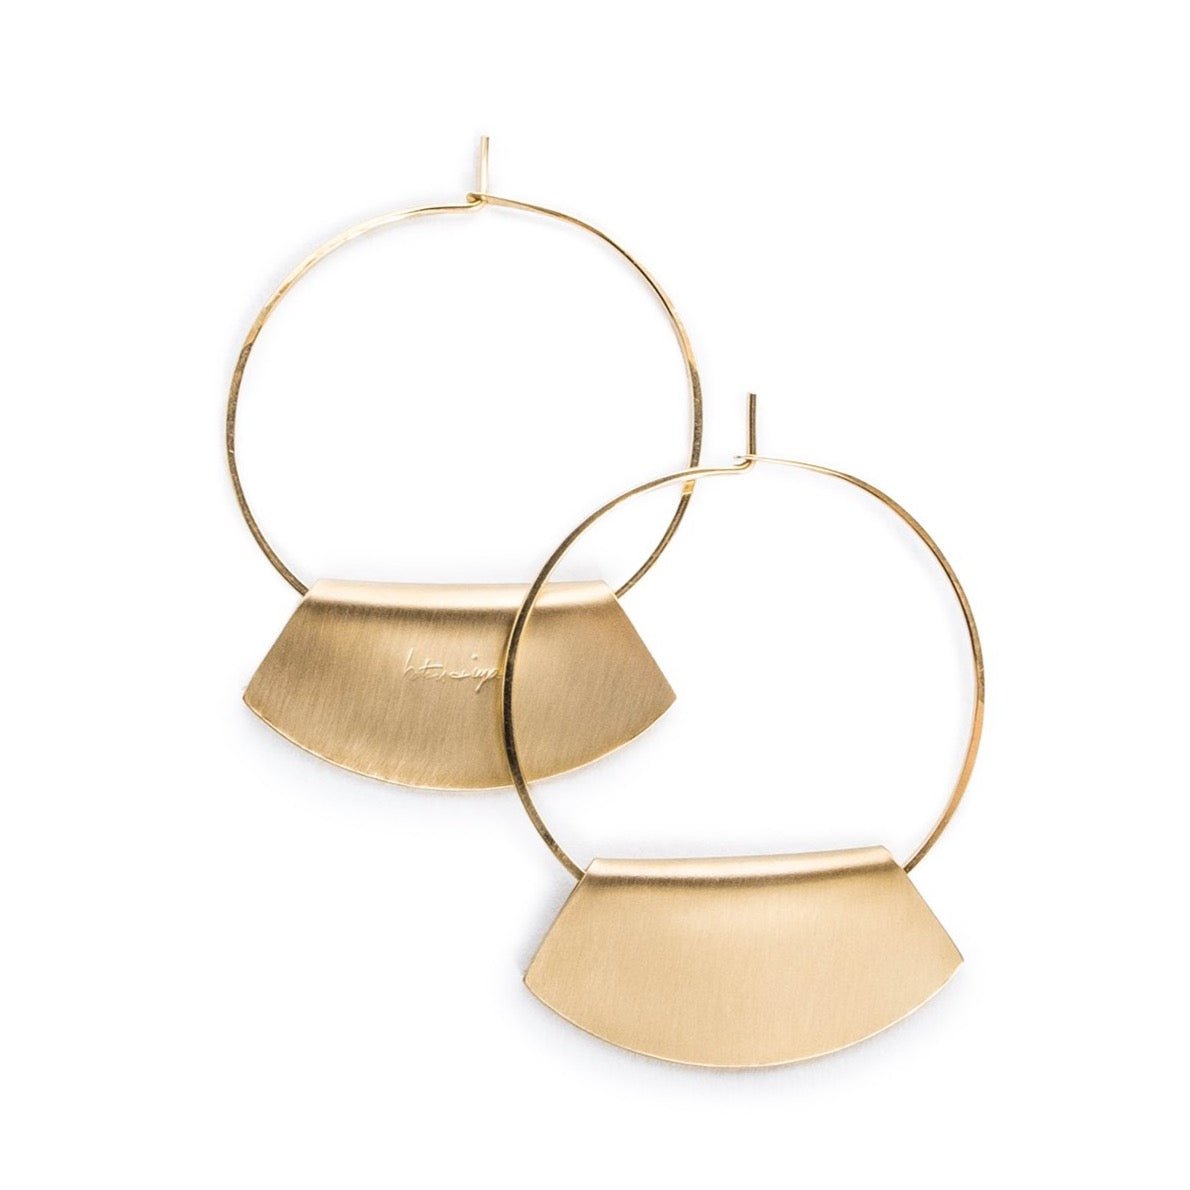 Hand-formed hoop earrings of 14k gold-fill wire, with folded, fan-shaped, 14k gold-filled pendants, engraved with the betsy & iya logo. Hand-crafted in Portland, Oregon.